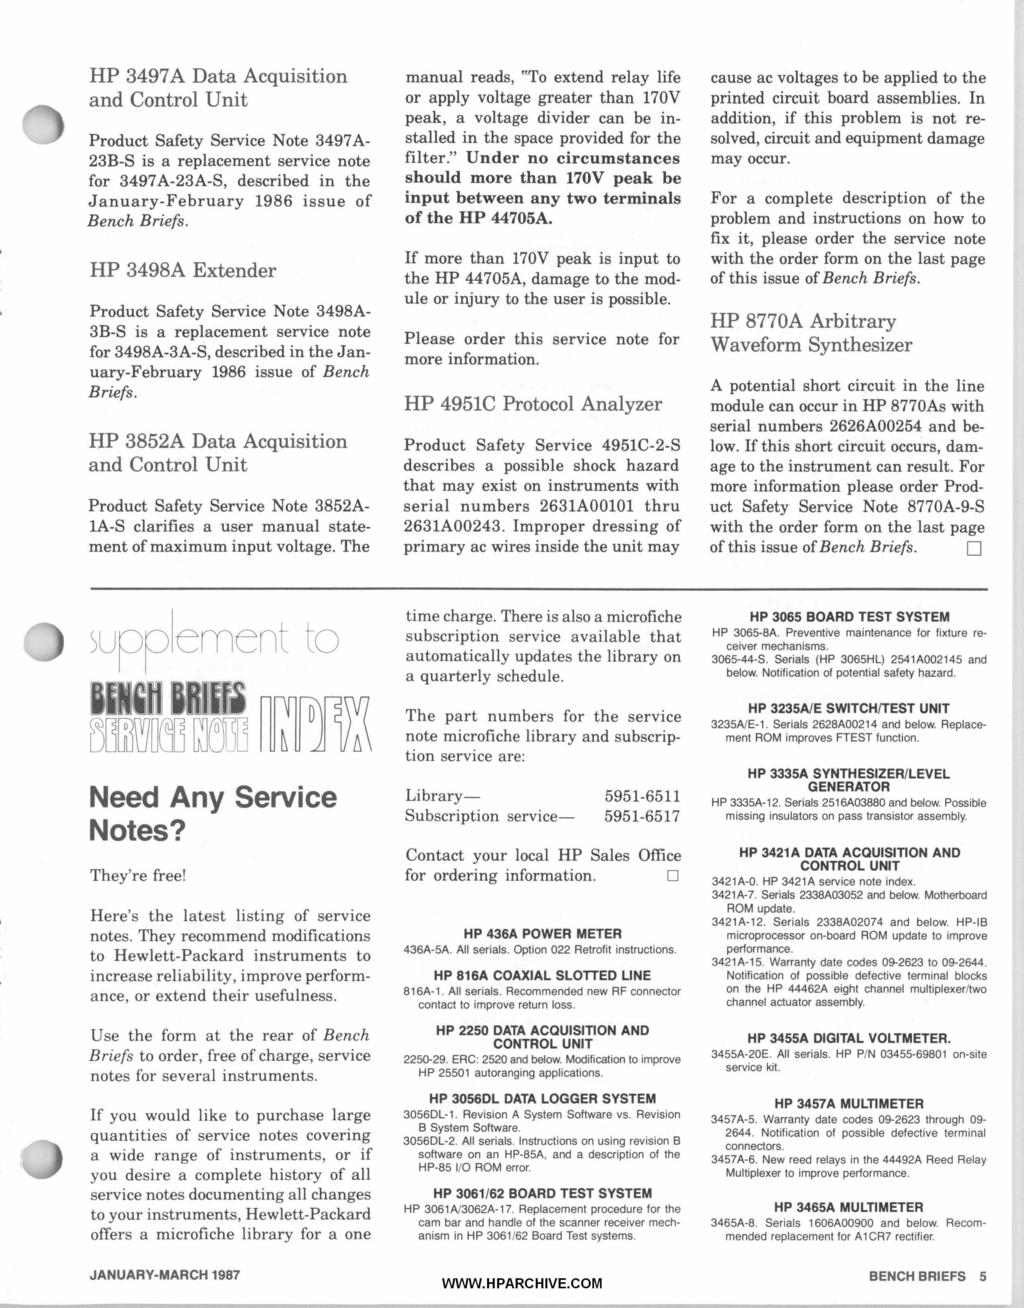 HP 3497A Data Acquisition and Control Unit Product Safety Service Note 3497A- 23B-S is a replacement service note for 3497A-23A-S1 described in the January-February 1986 issue of Bench Briefs.